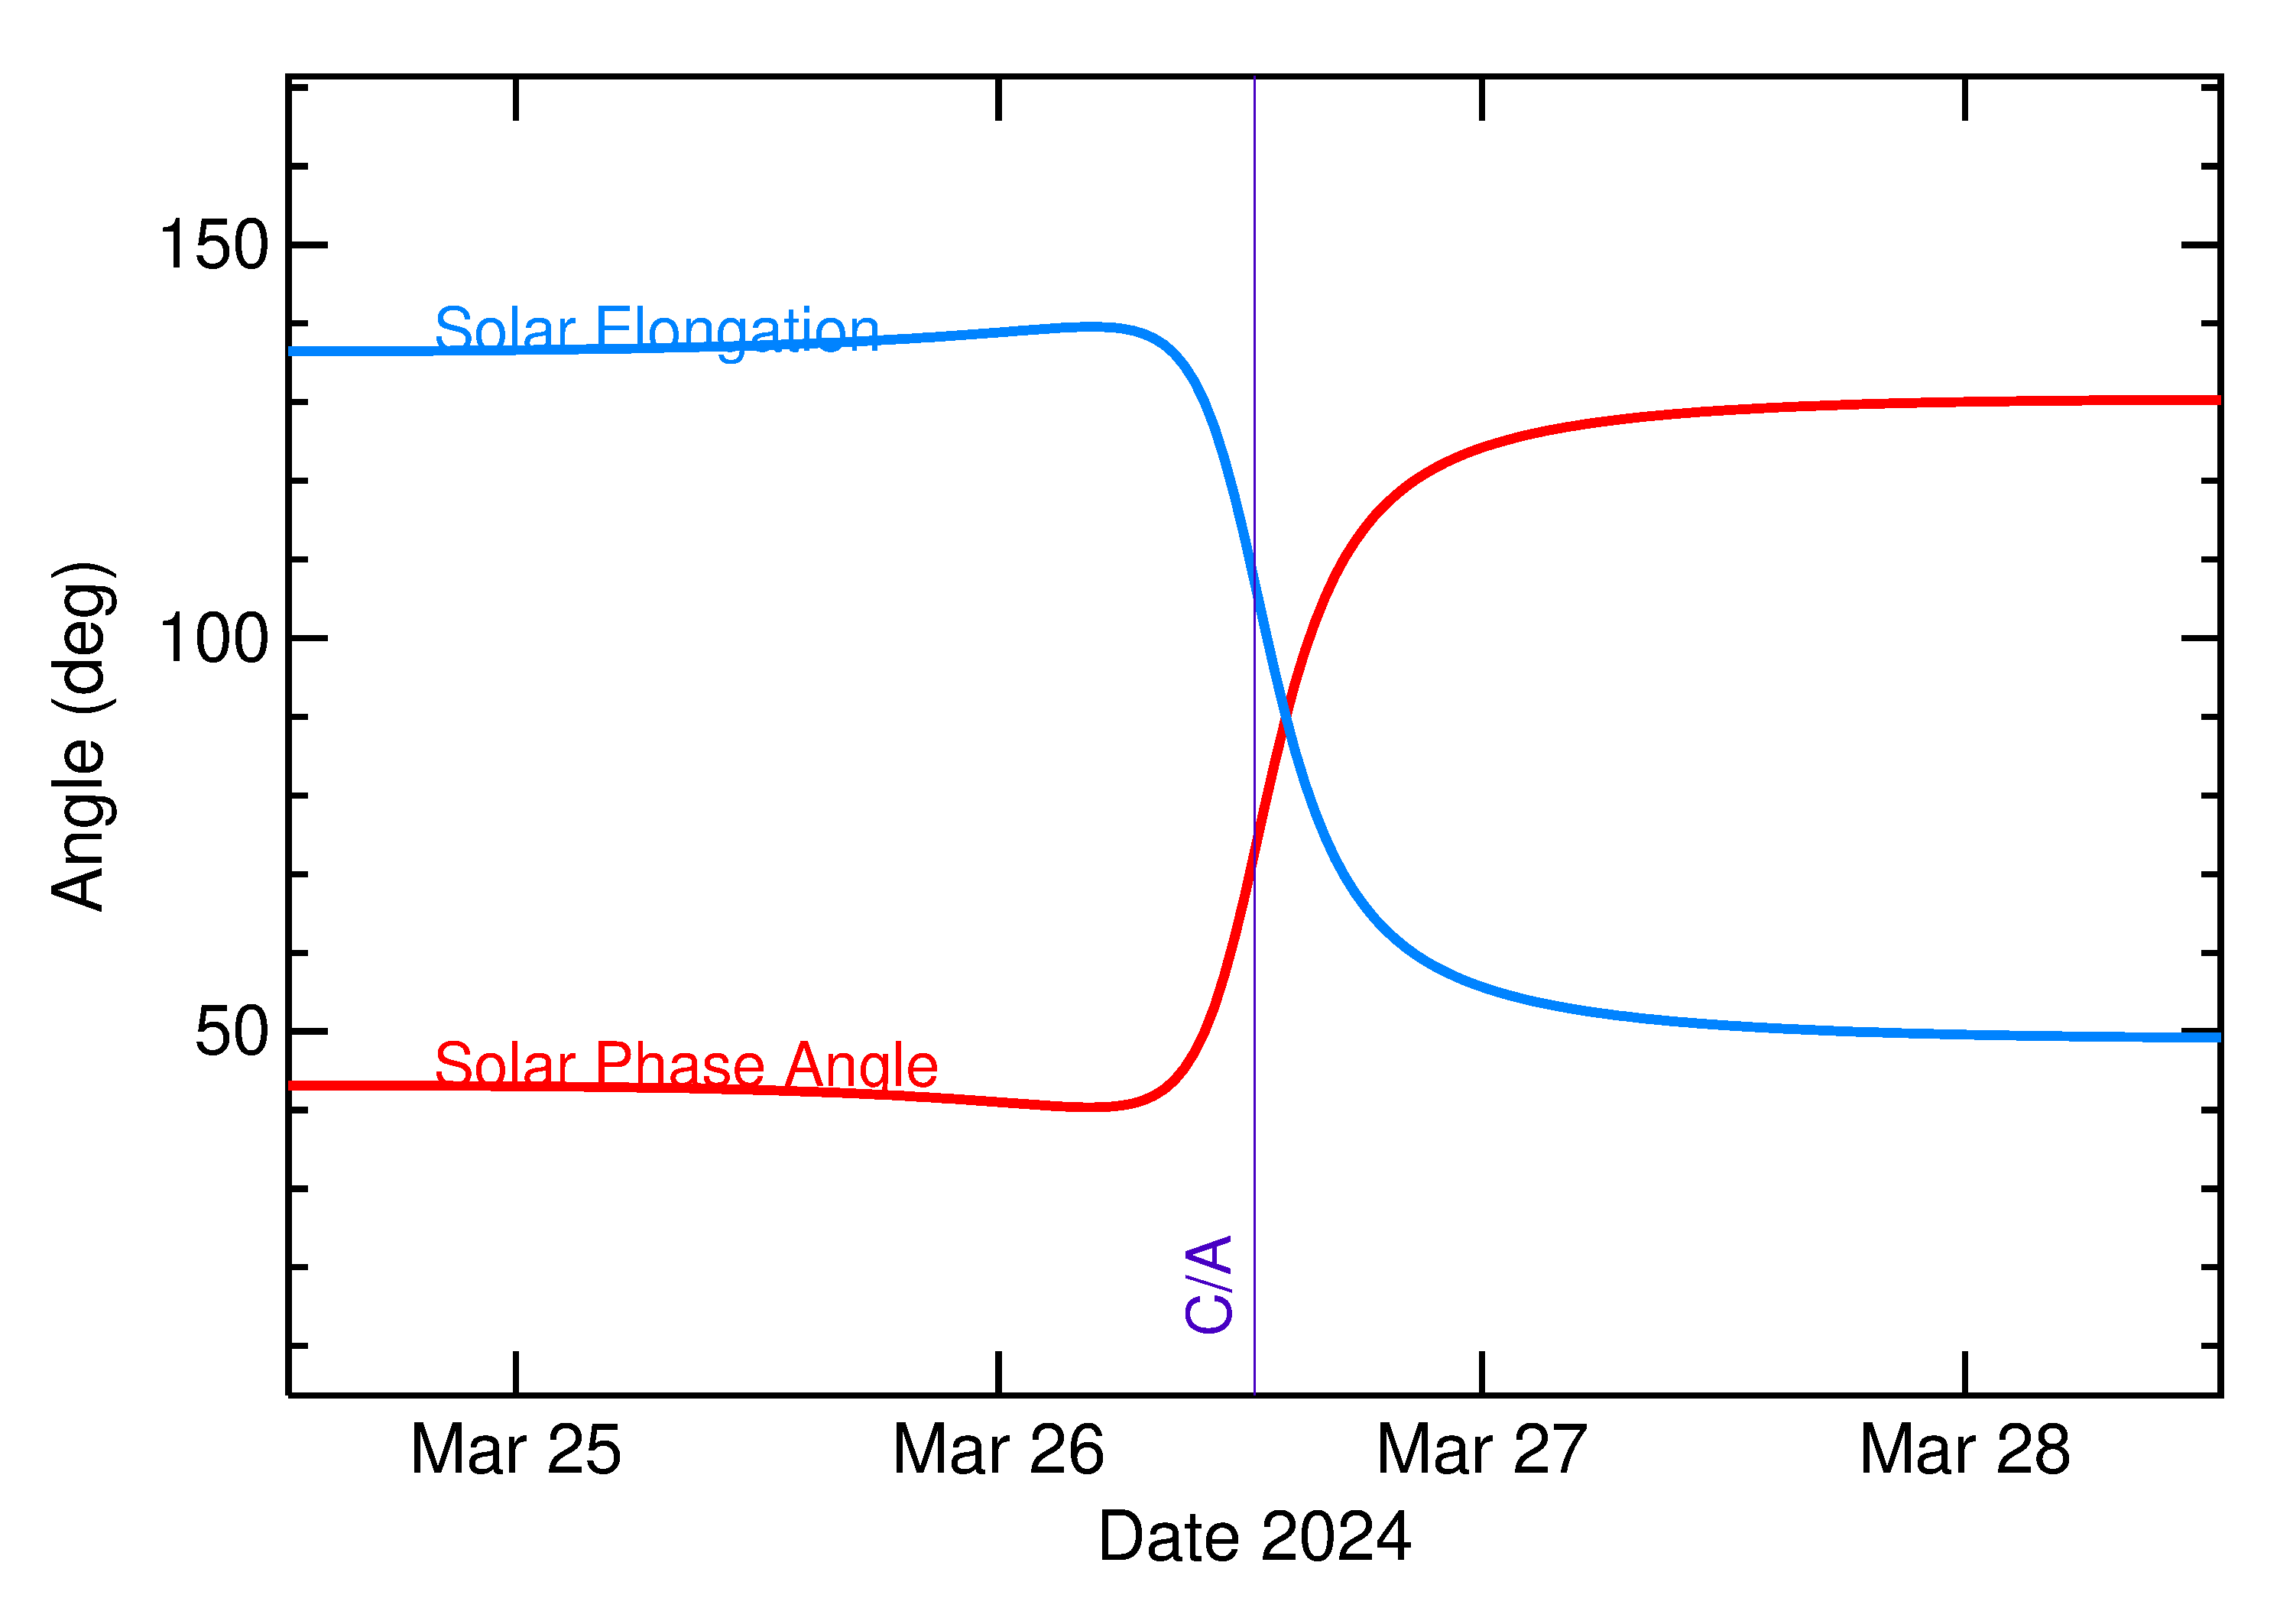 Solar Elongation and Solar Phase Angle of 2024 FO3 in the days around closest approach